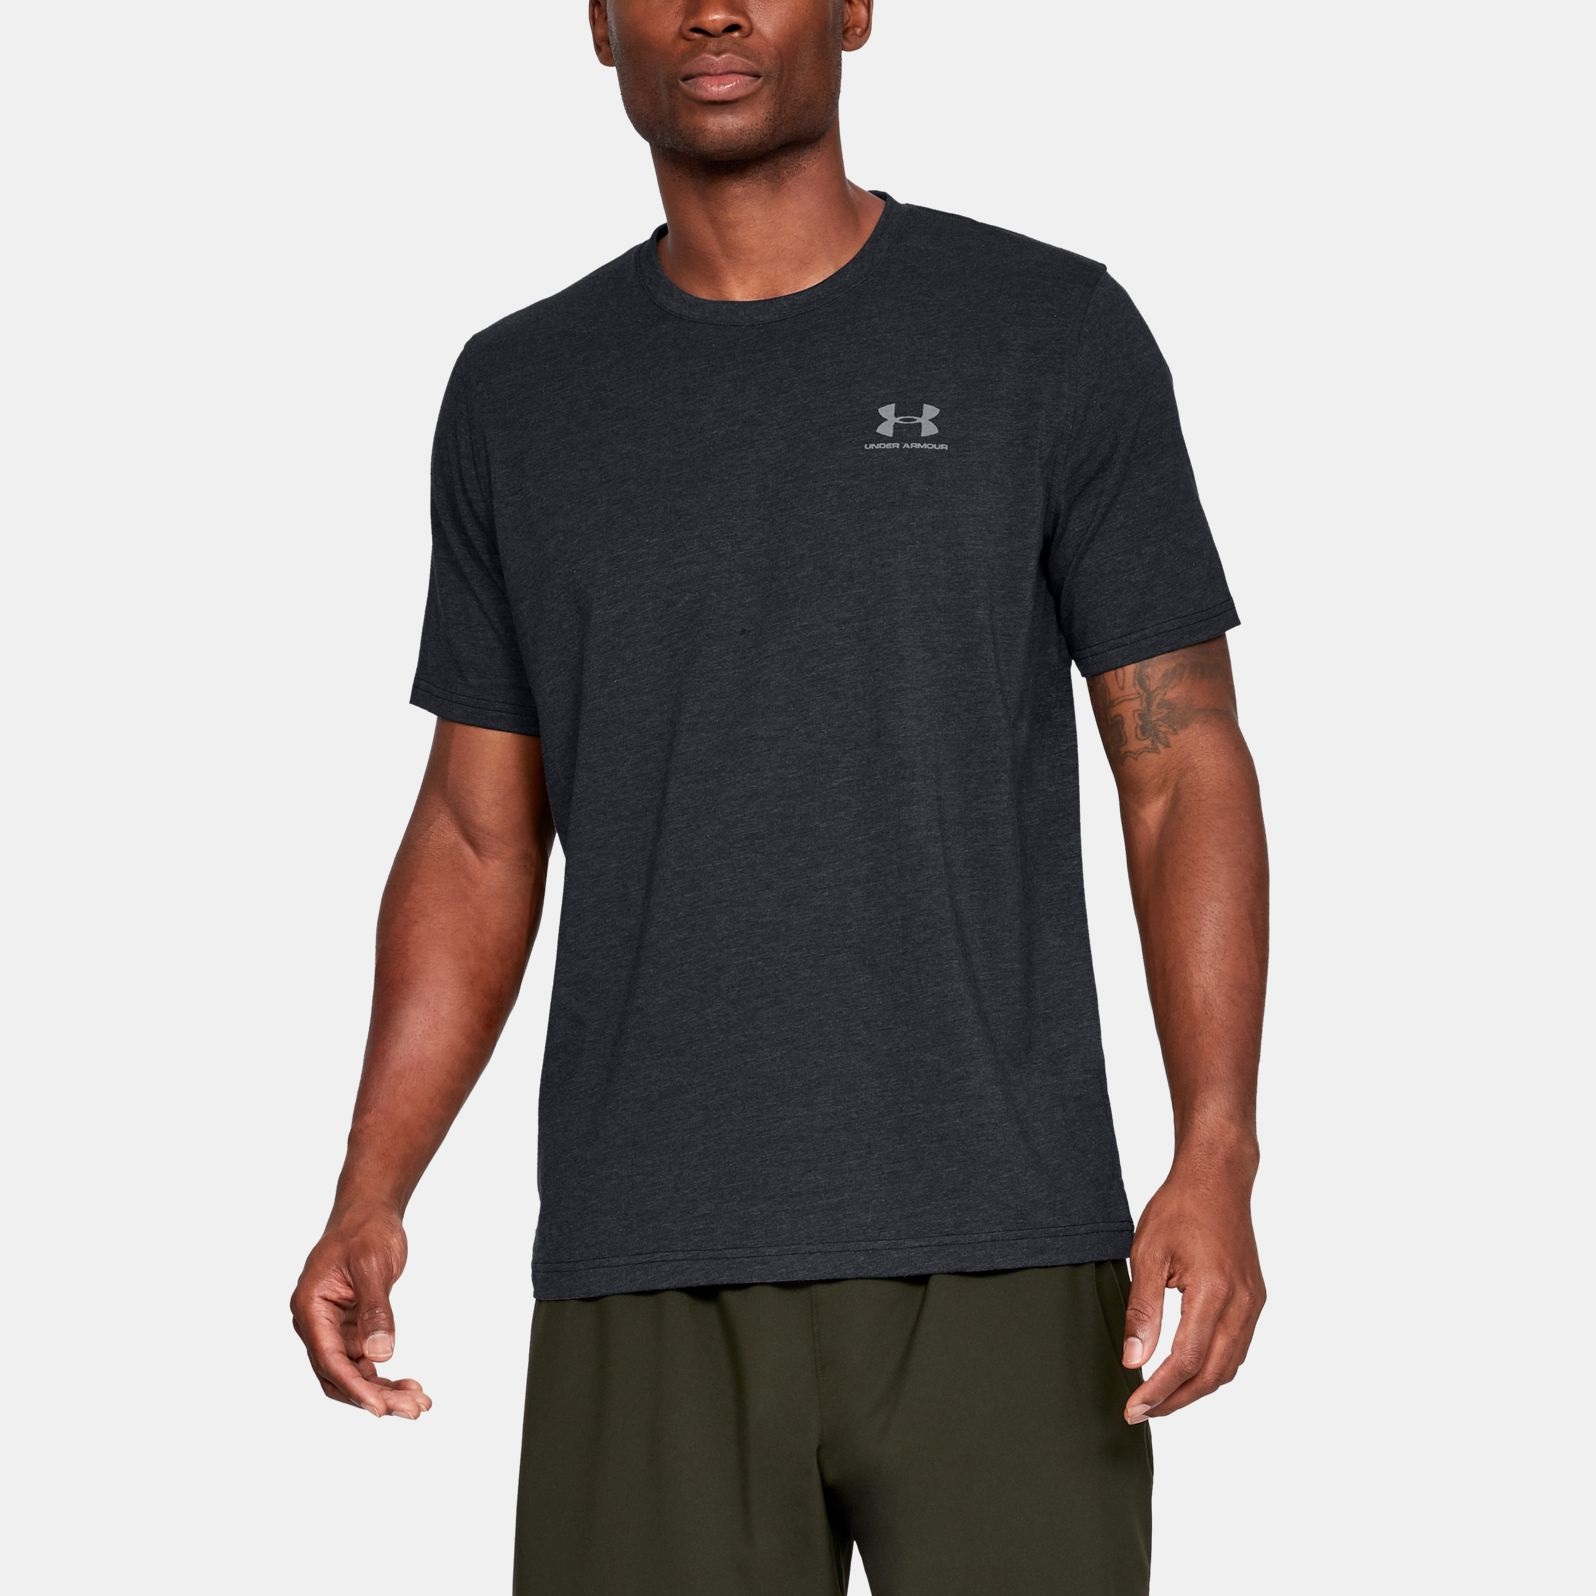 Details about   Under Armour CC Left Chest Lockup Tee 